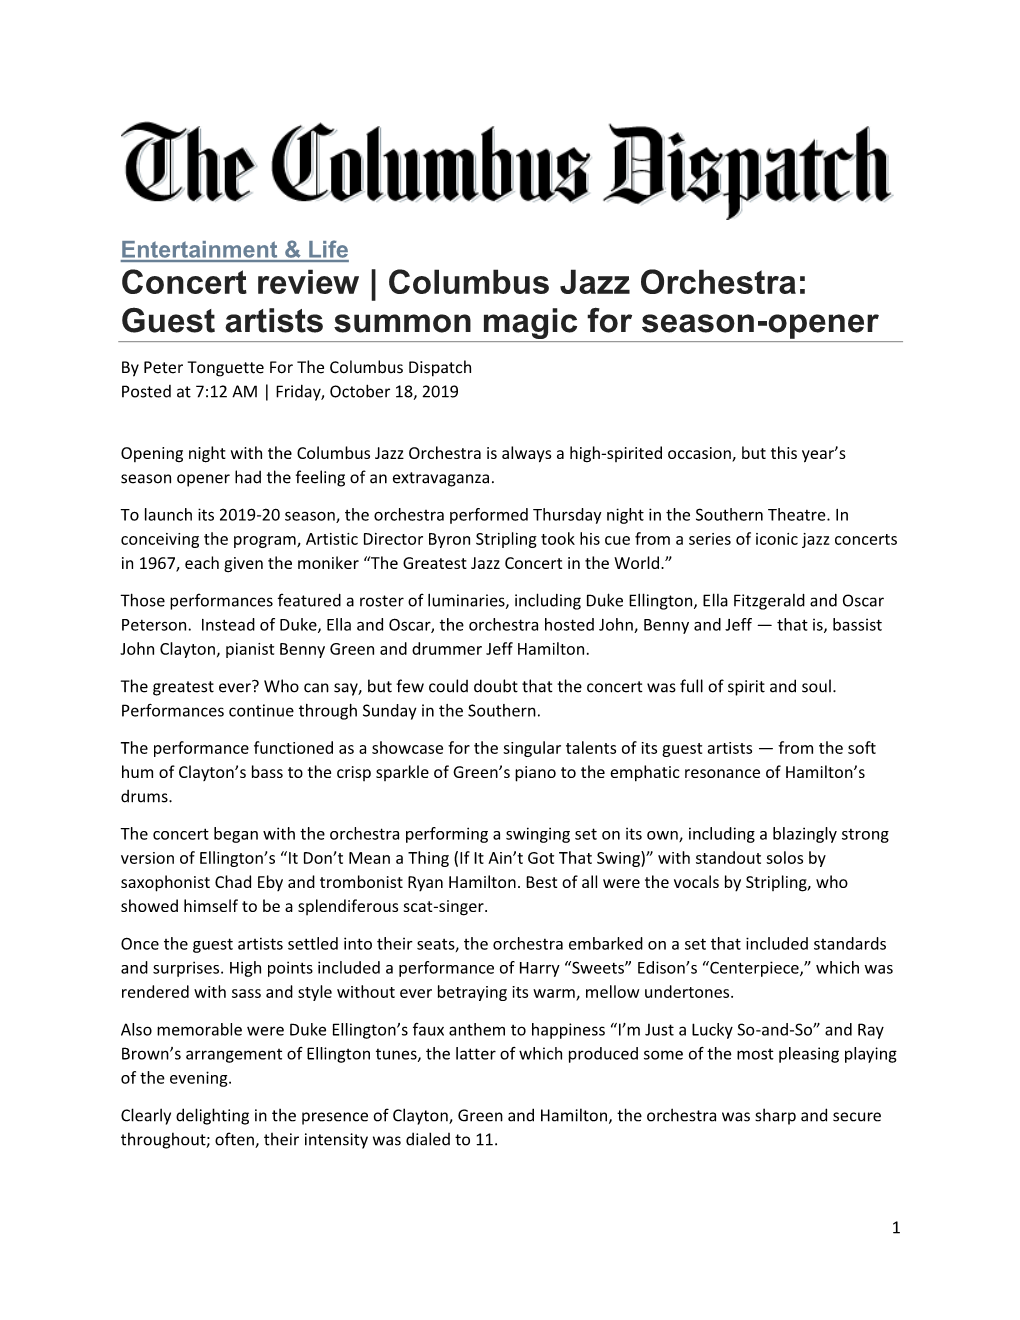 Concert Review | Columbus Jazz Orchestra: Guest Artists Summon Magic for Season-Opener